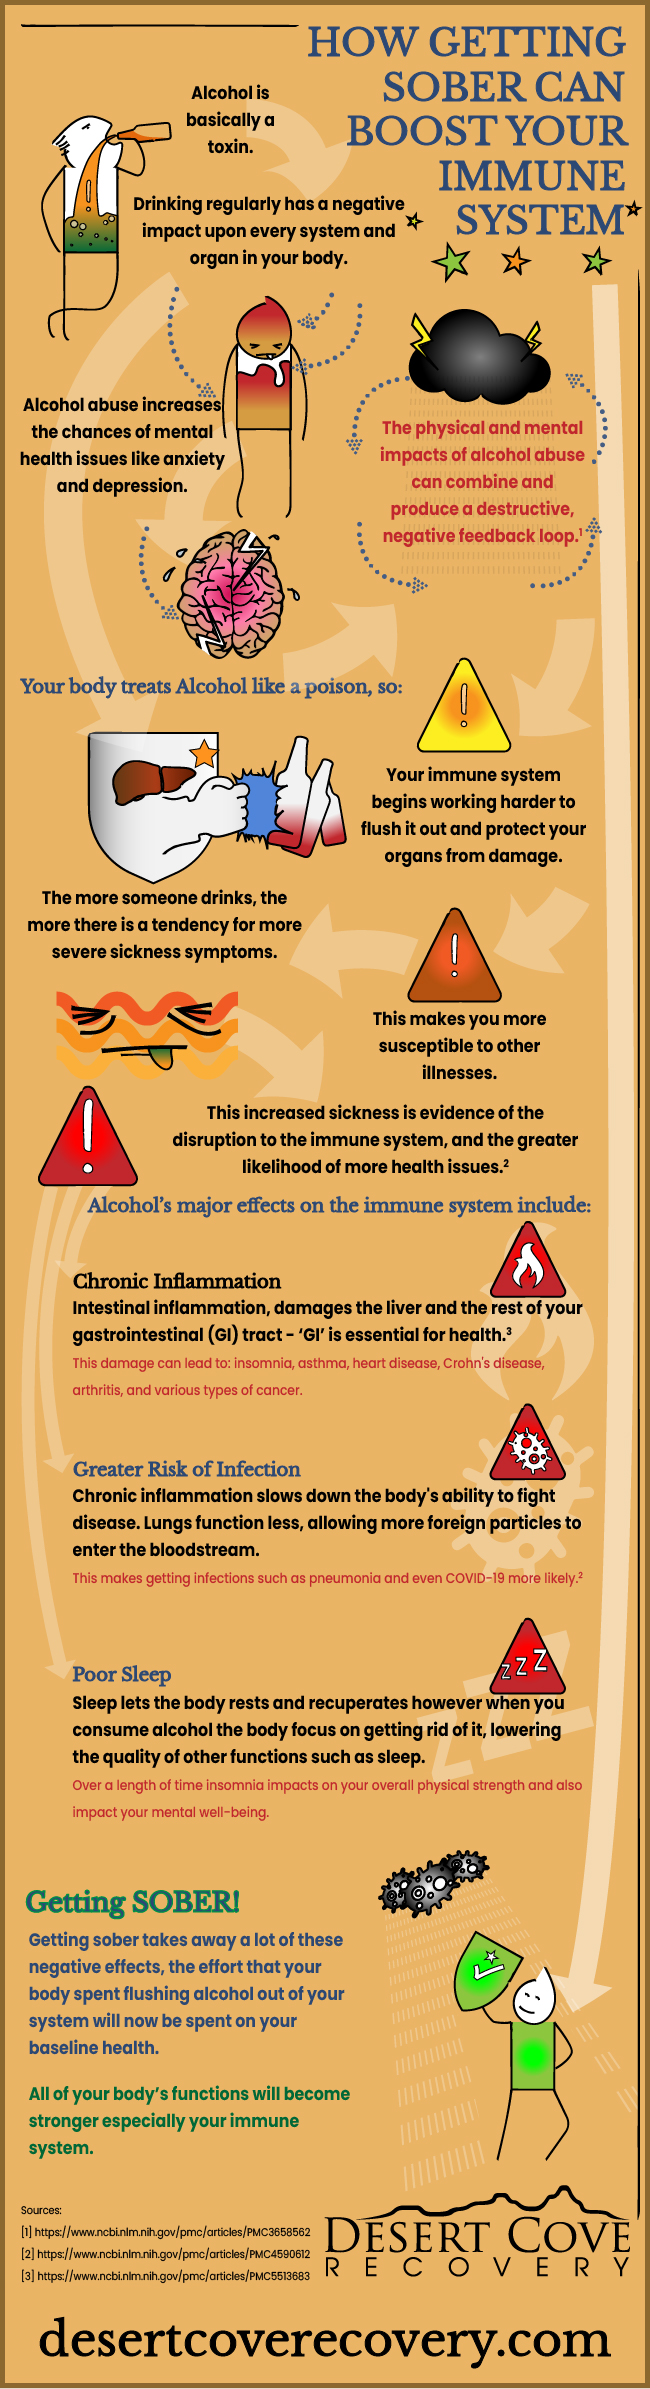 How Getting Sober Can Boost Your Immune System Infographic